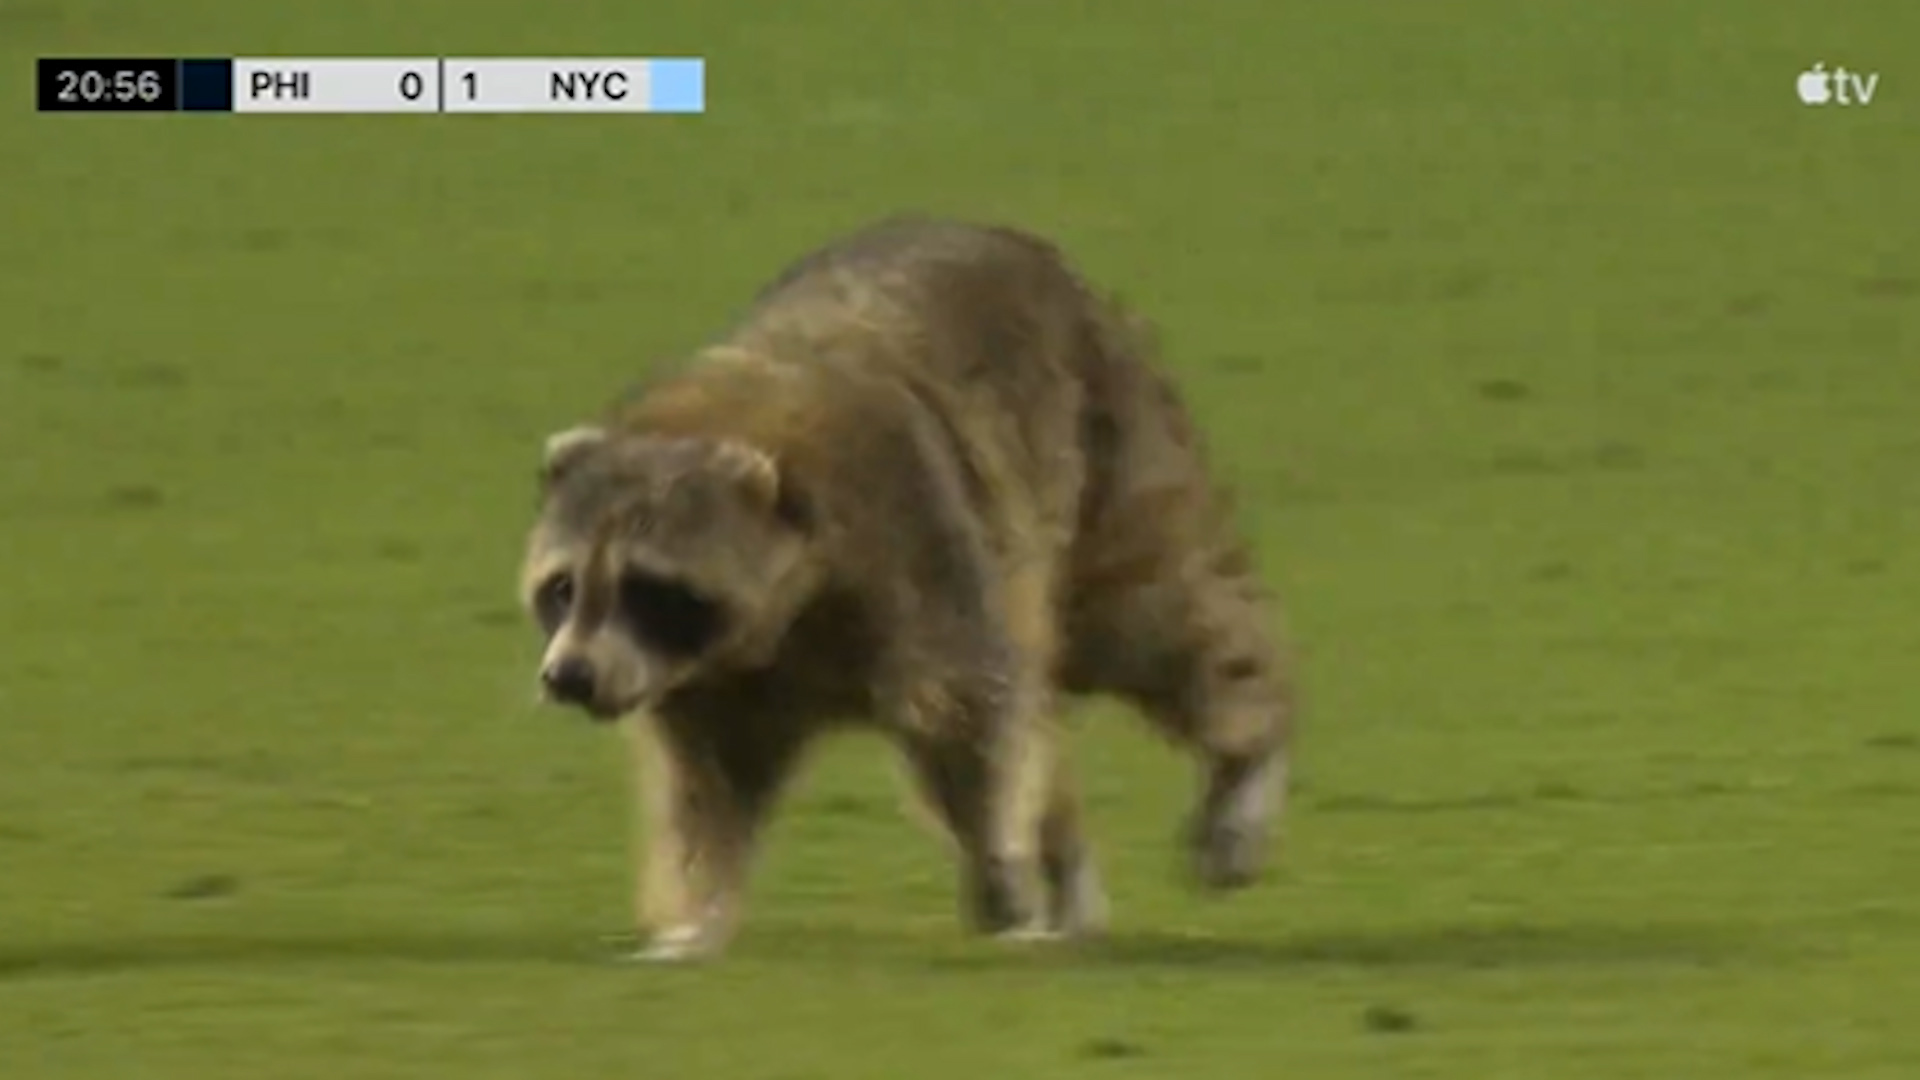 A raccoon invaded the field during the Philadelphia Union vs. New York City FC match, which stopped play for several minutes as crews tried to catch the animal.